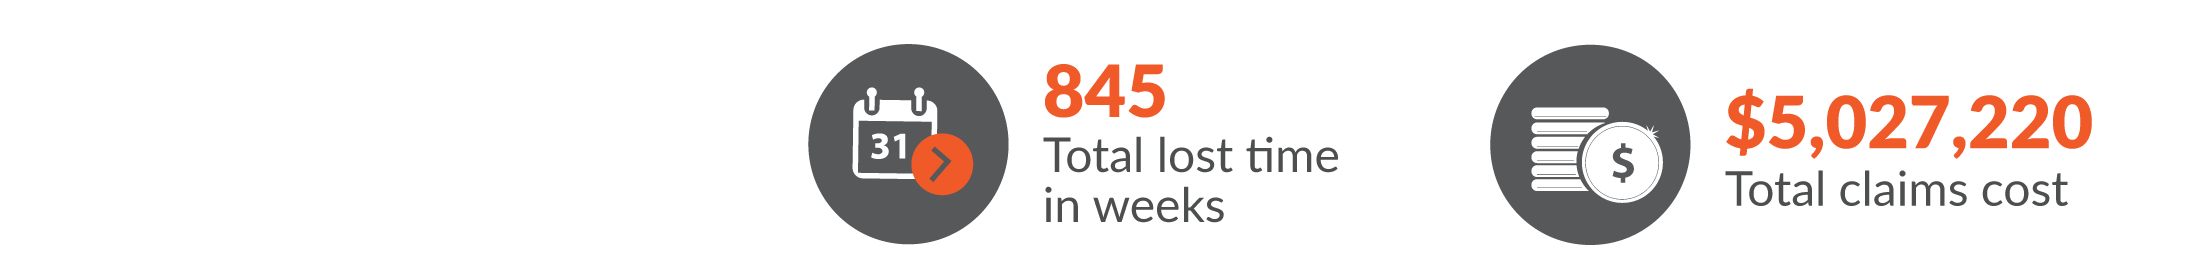 This infographic shows total workers compensation claims for Health and Community Services resulted in 845 total lost time in weeks and $5,027,220 was paid in benefits.